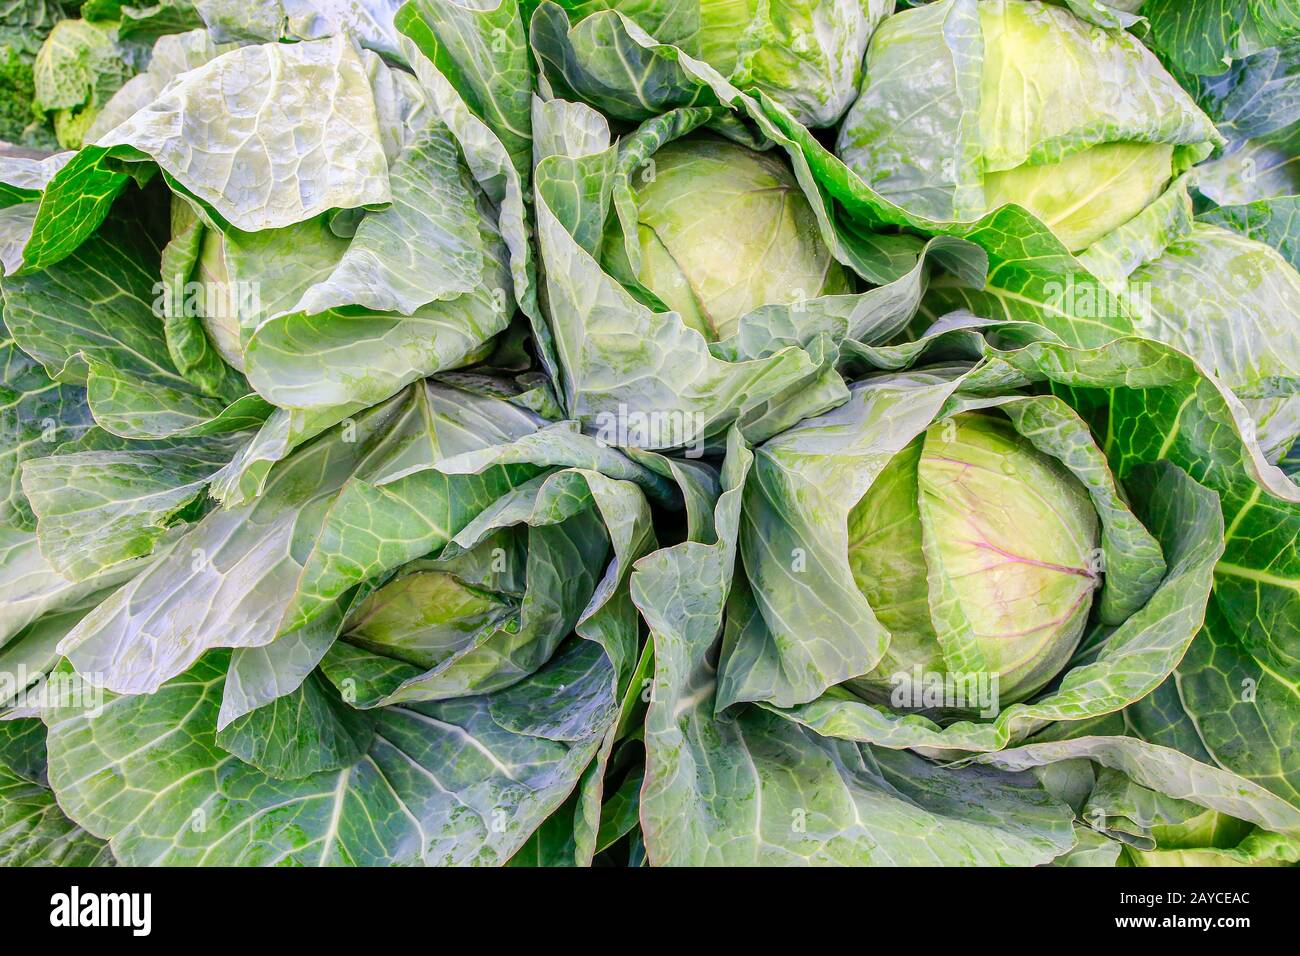 Green cabbage plants as vegetable on market Stock Photo